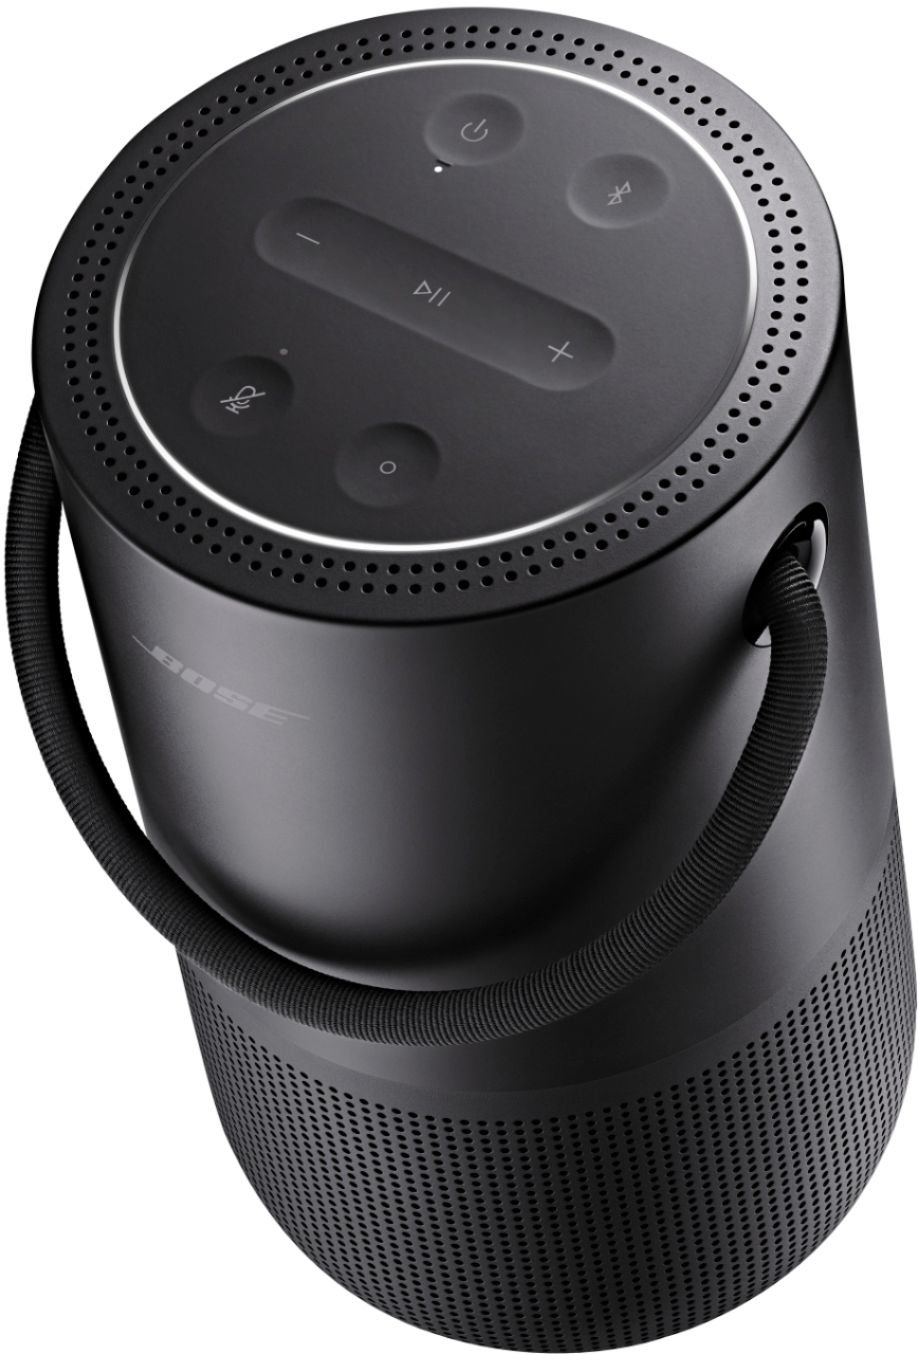 Bose - Portable Smart Speaker with built-in WiFi, Bluetooth, Google  Assistant and Alexa Voice Control - Triple Black